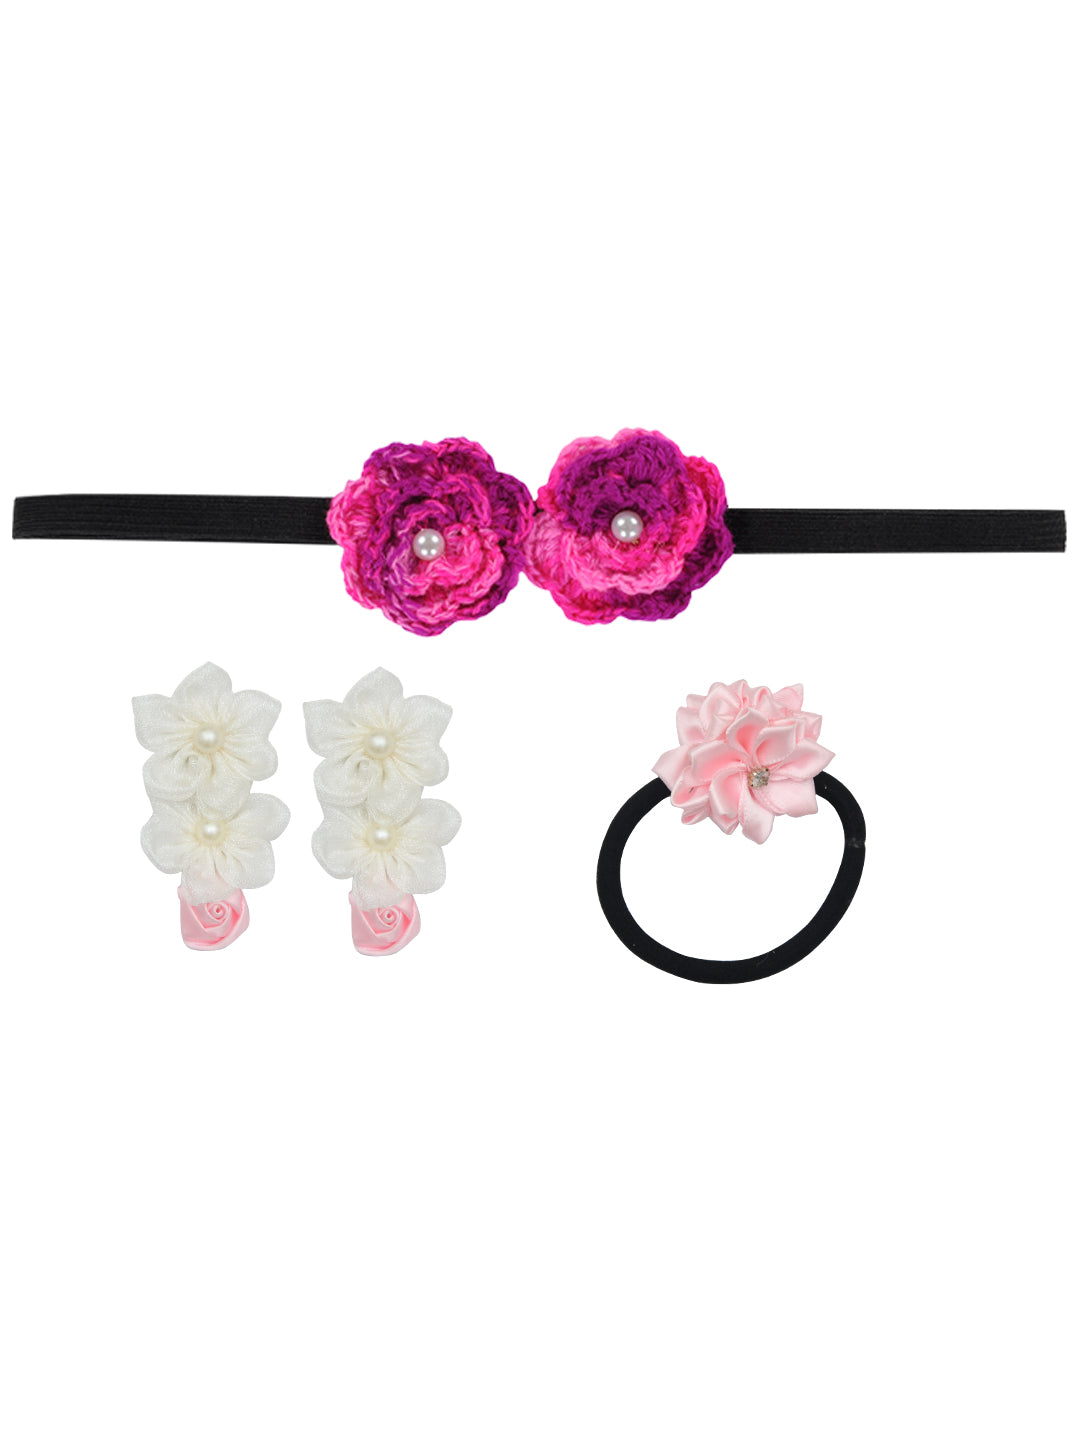 Pack of 4 Multicolor Super Bloom Girls Hair Accessories for Girls